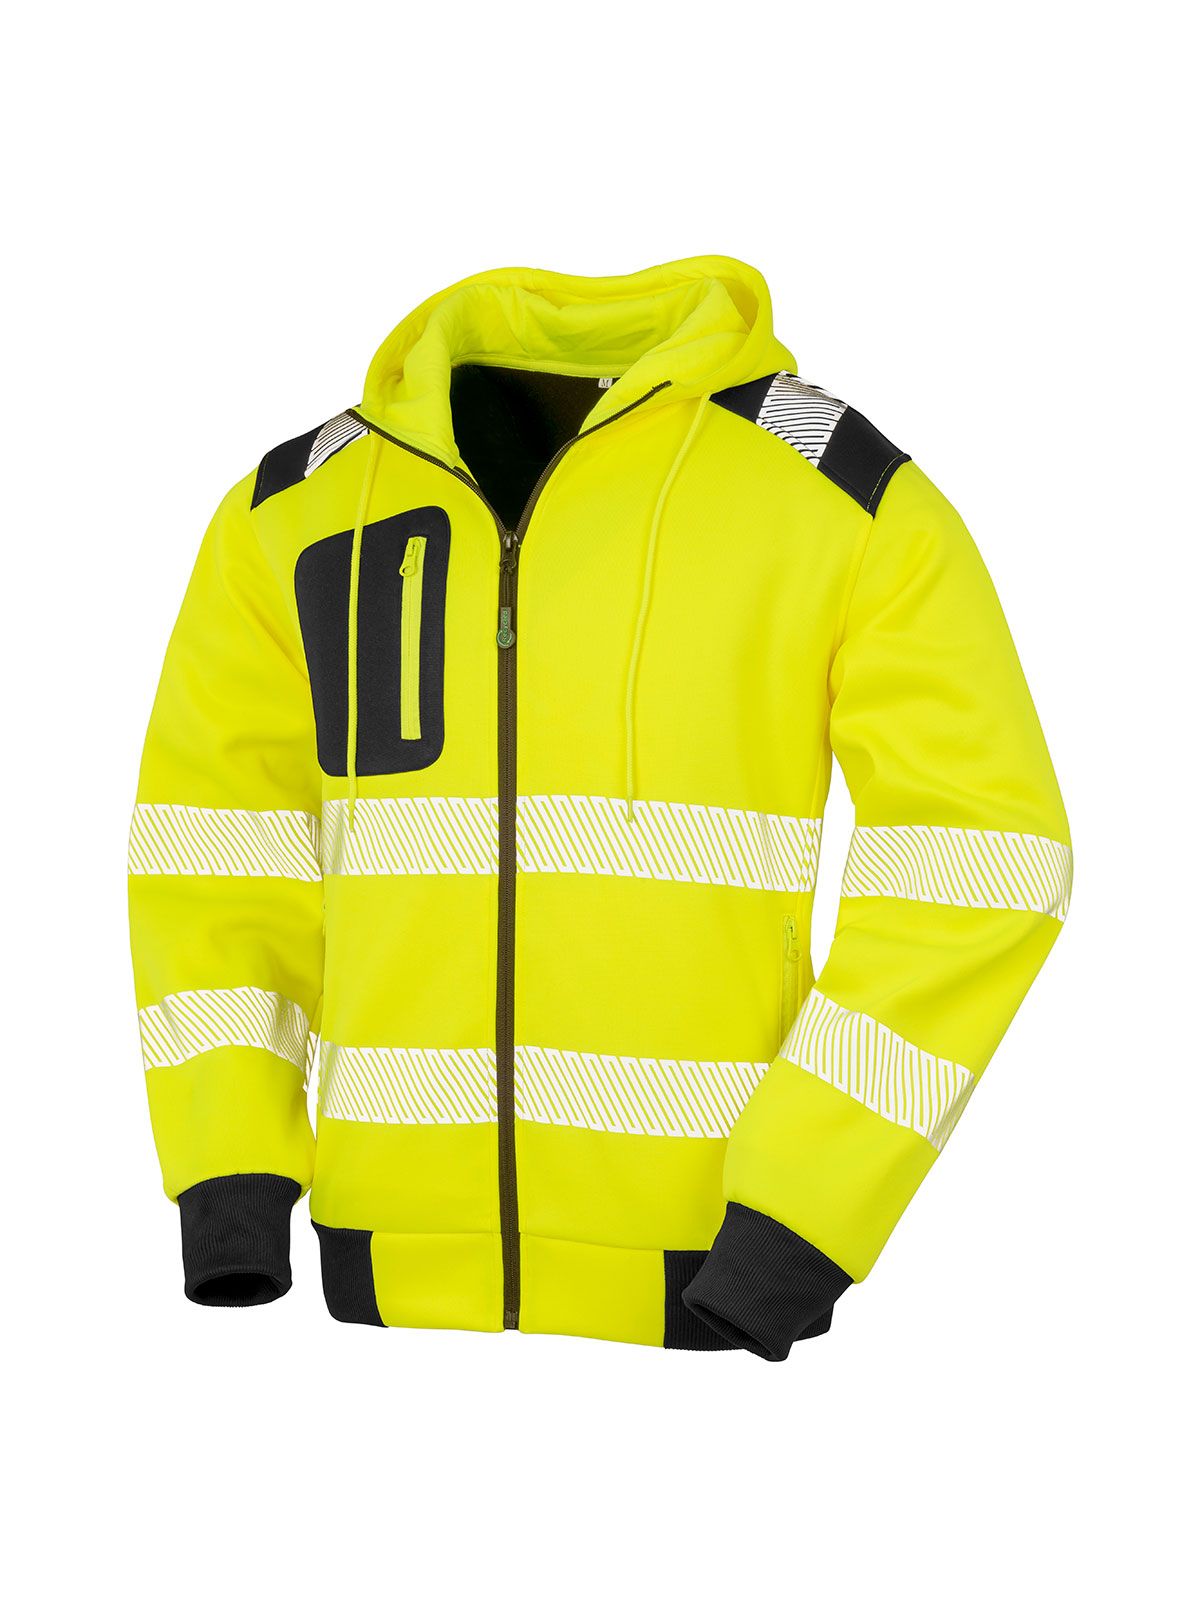 recycled-robust-zipped-safety-hoody-yellow-black.webp